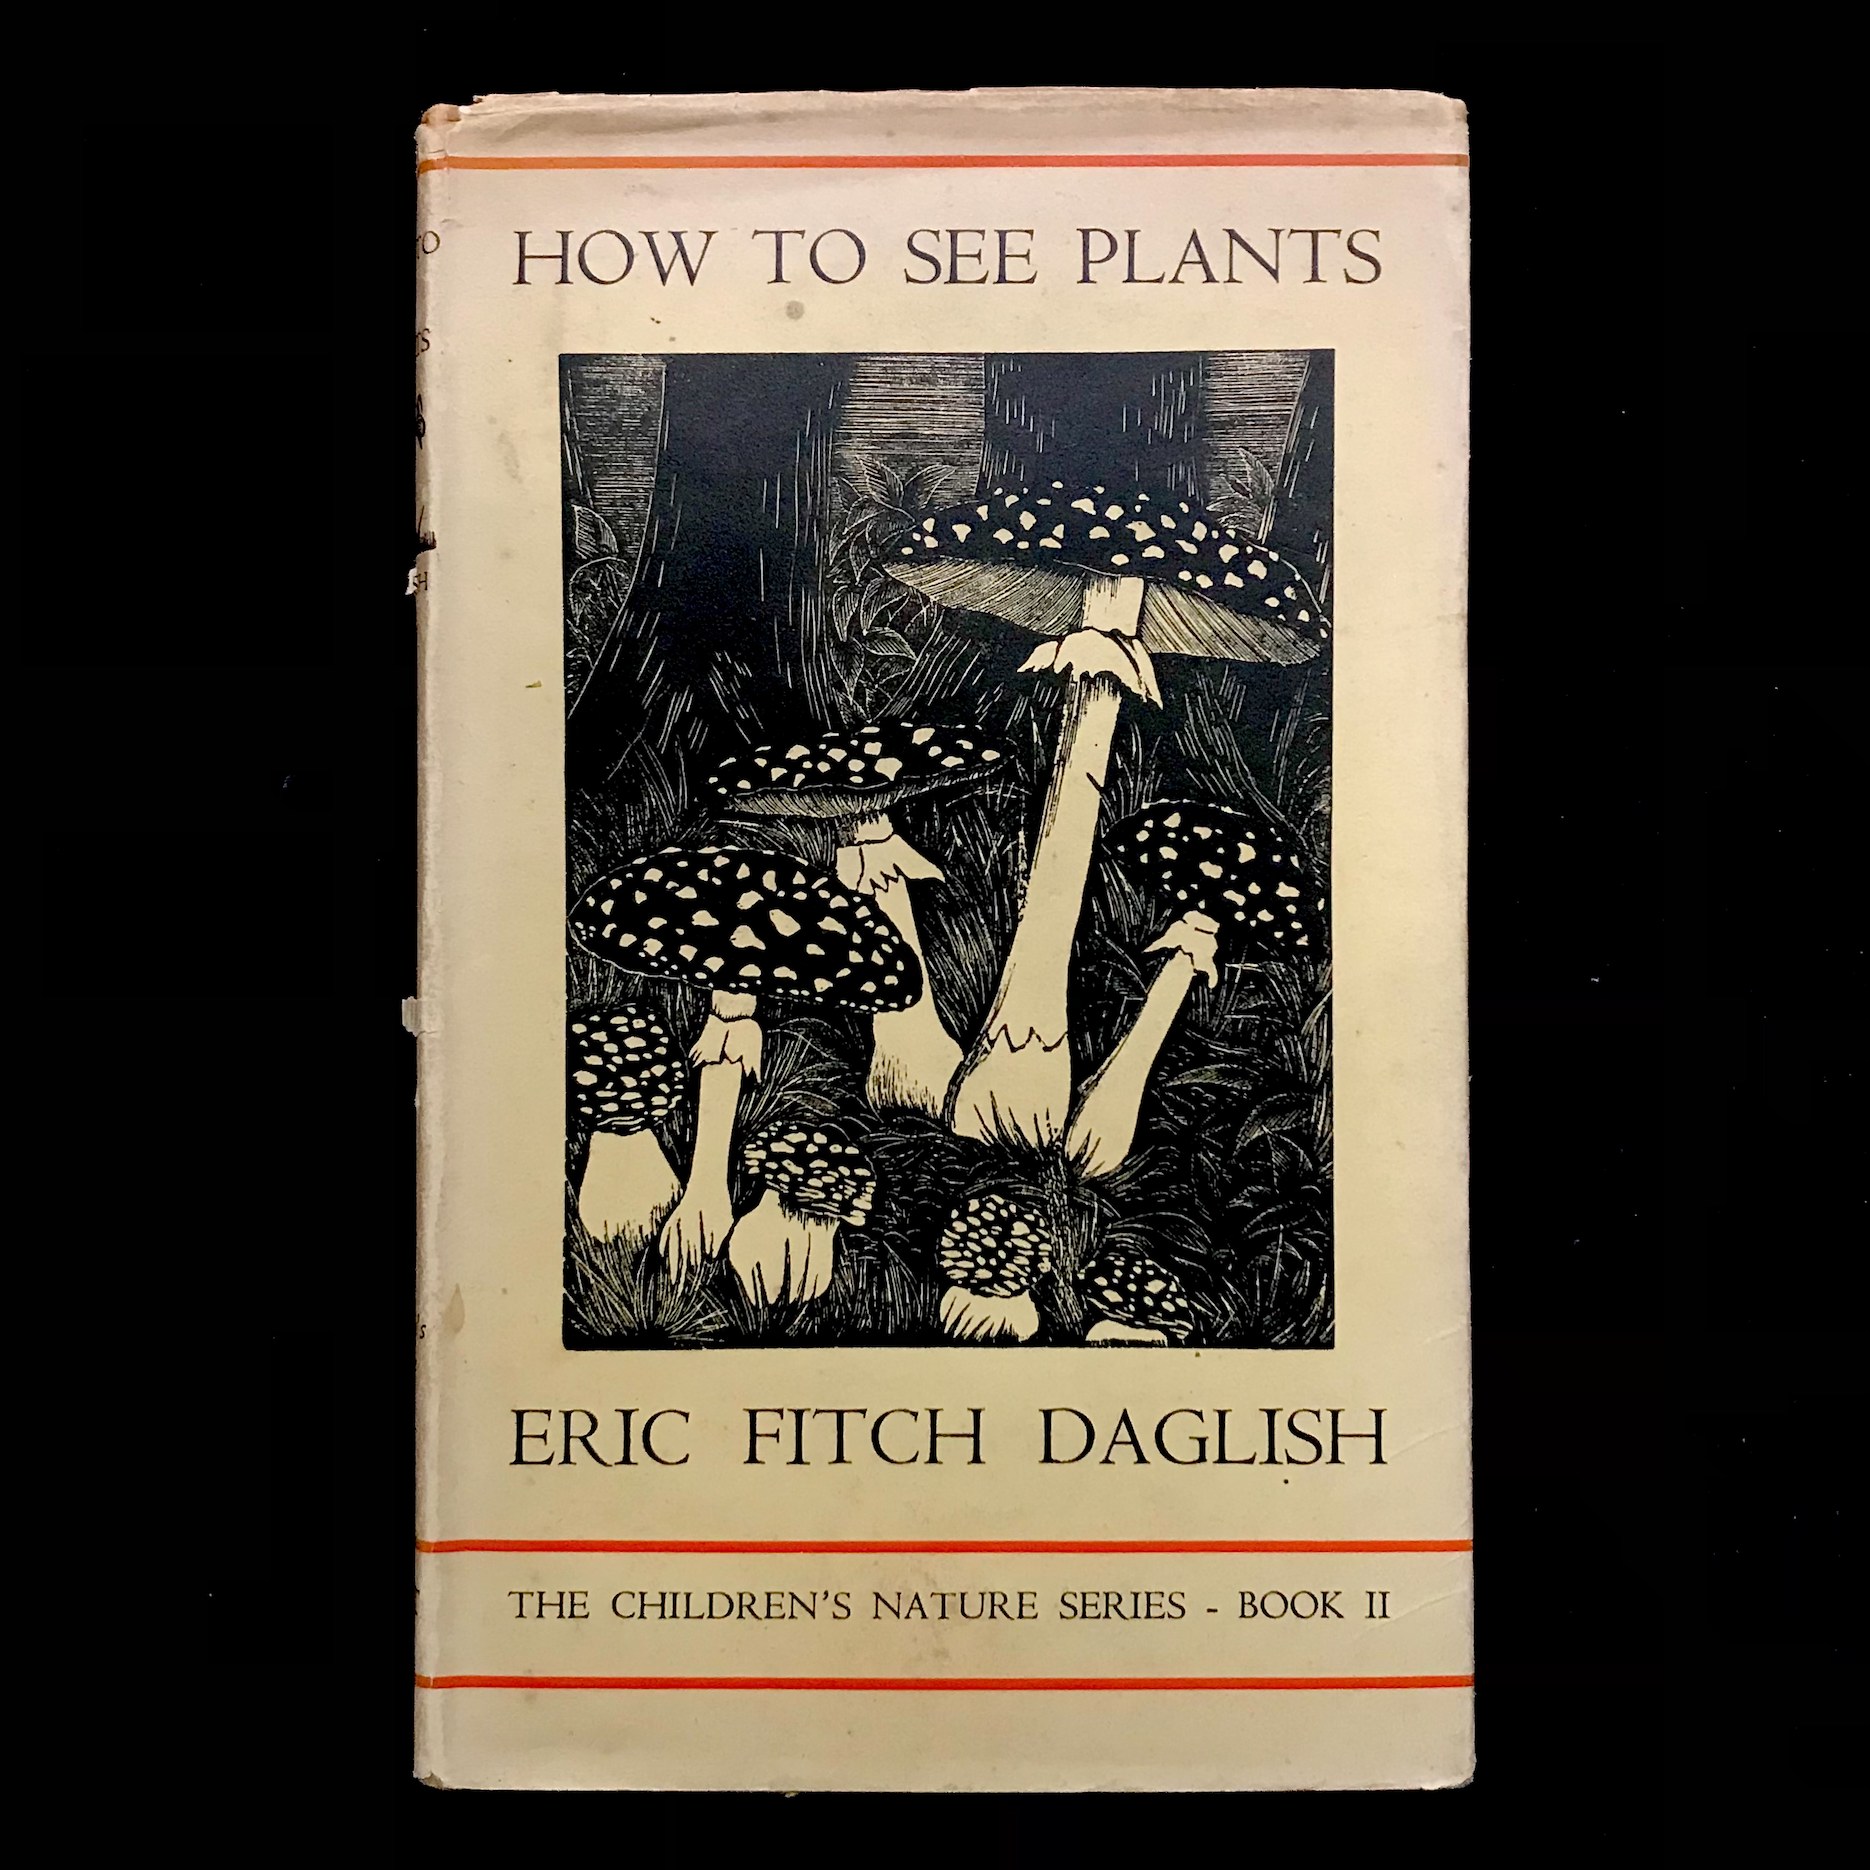 How To See Plants by Eric Fitch Daglish